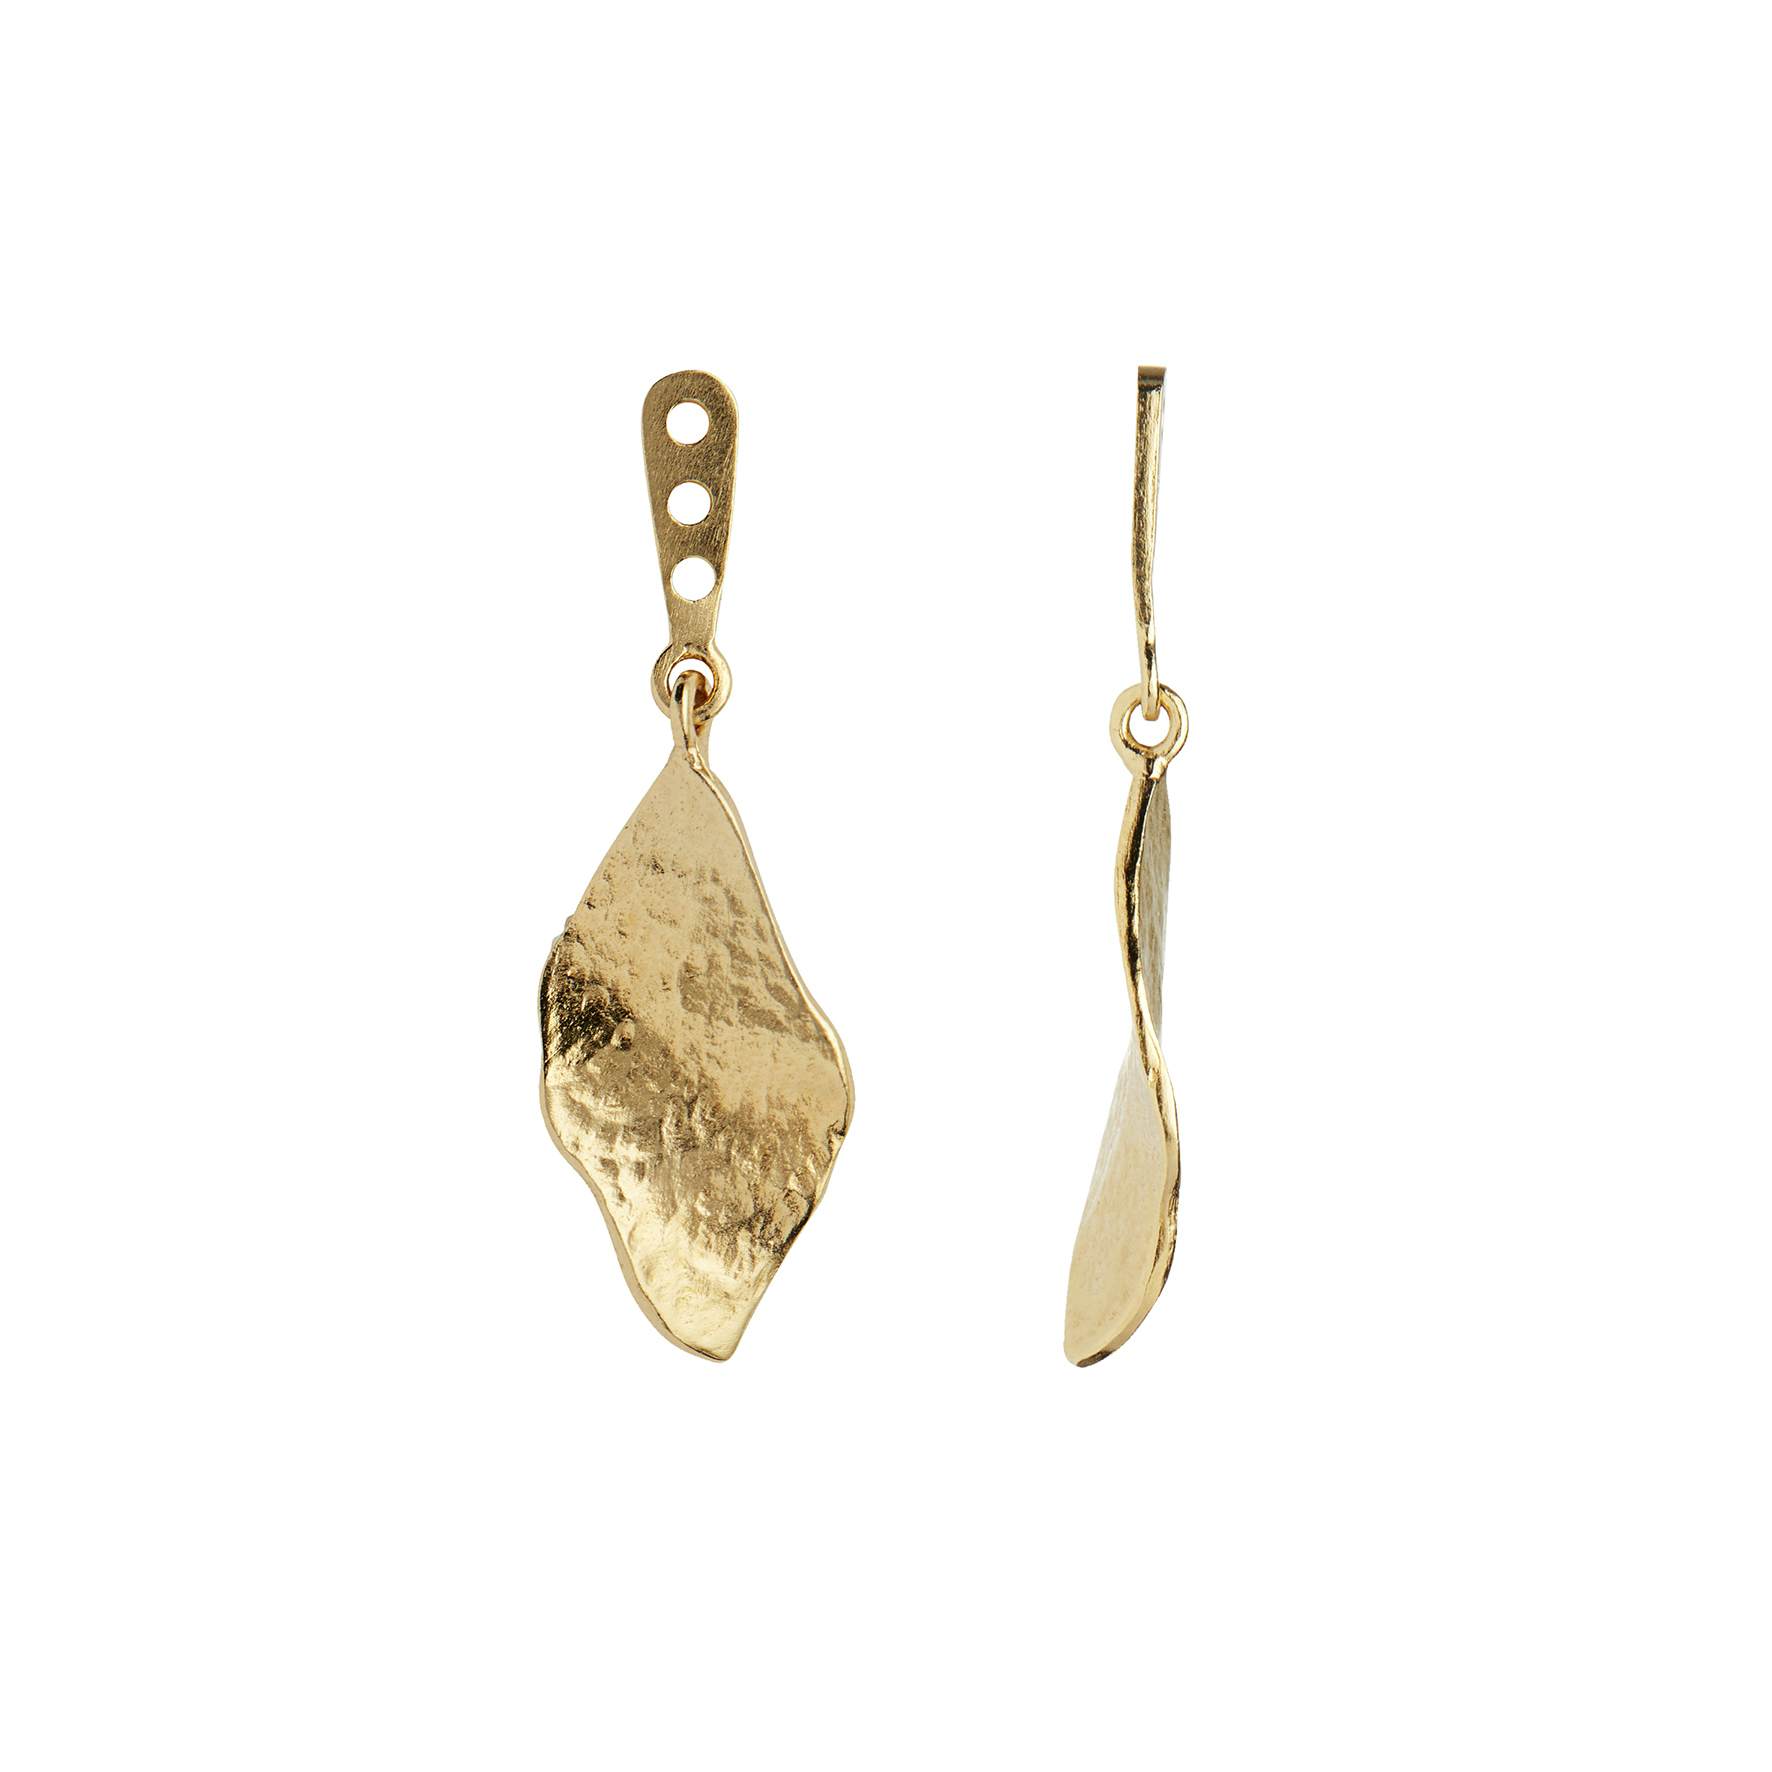 Ile De L'Amour Behind Ear Earring from STINE A Jewelry in Goldplated-Silver Sterling 925